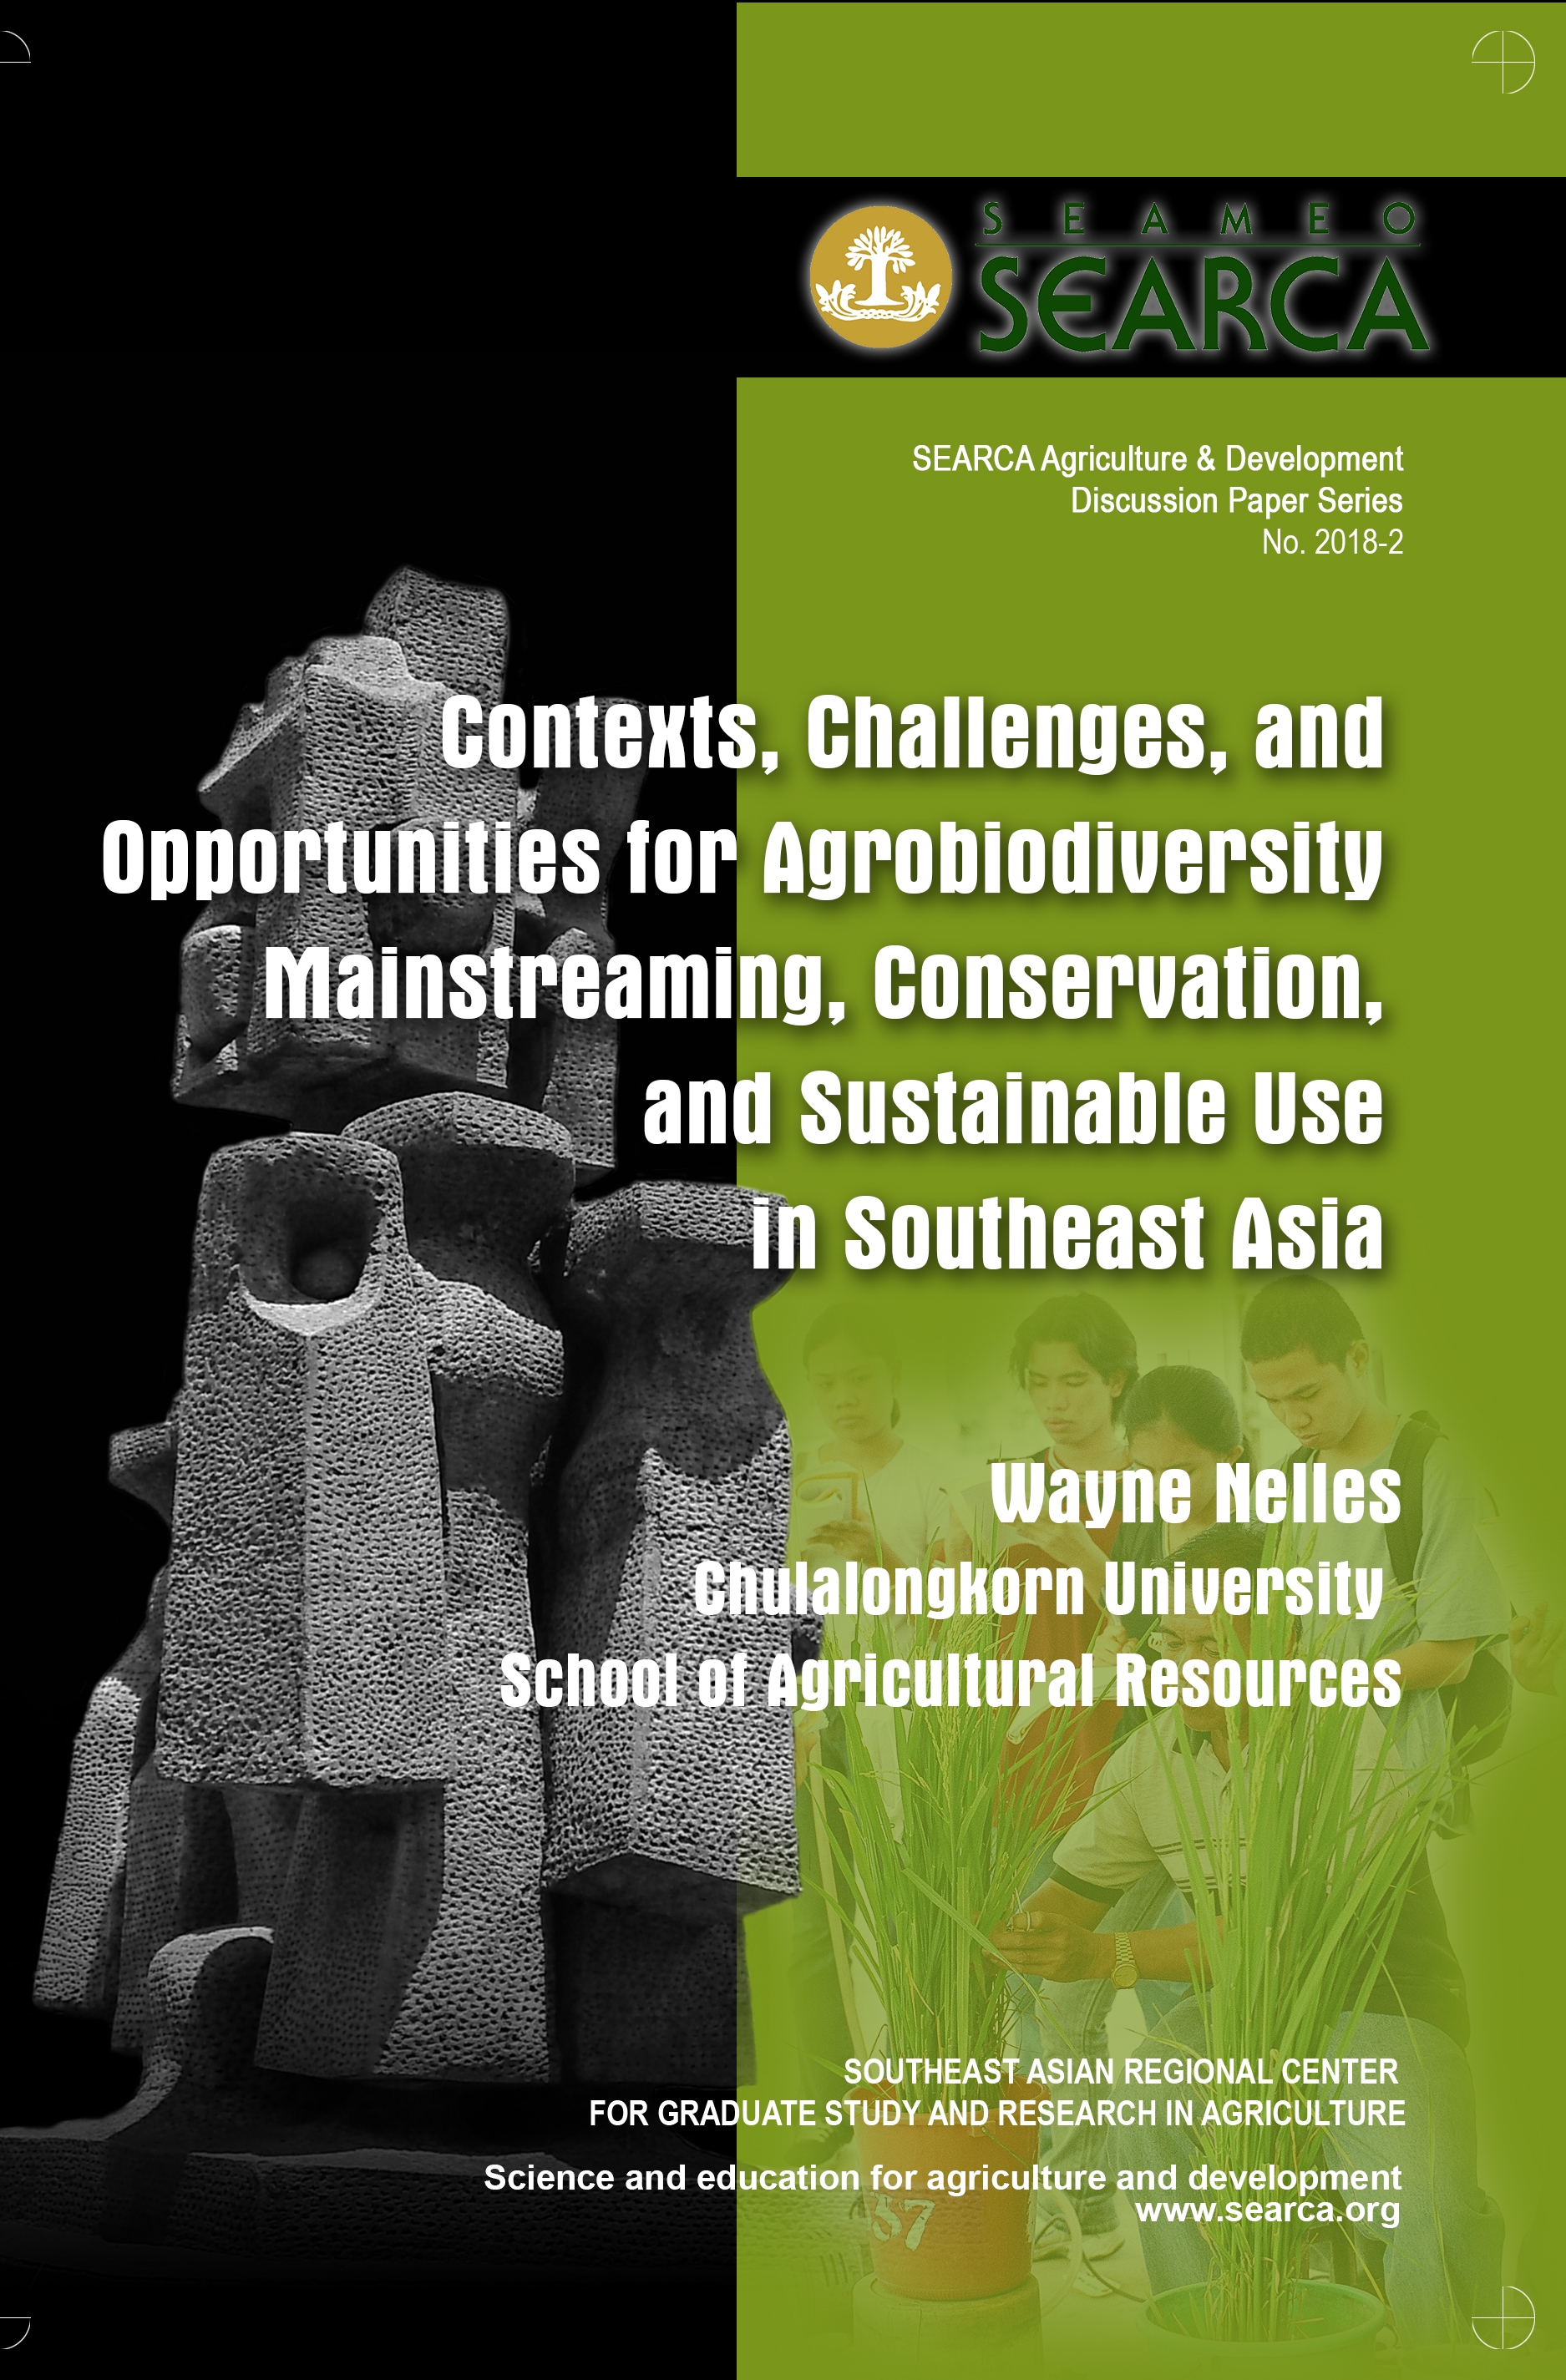 Contexts, Challenges, and Opportunities for Agrobiodiversity Mainstreaming, Conservation, and Sustainable Use in Southeast Asia